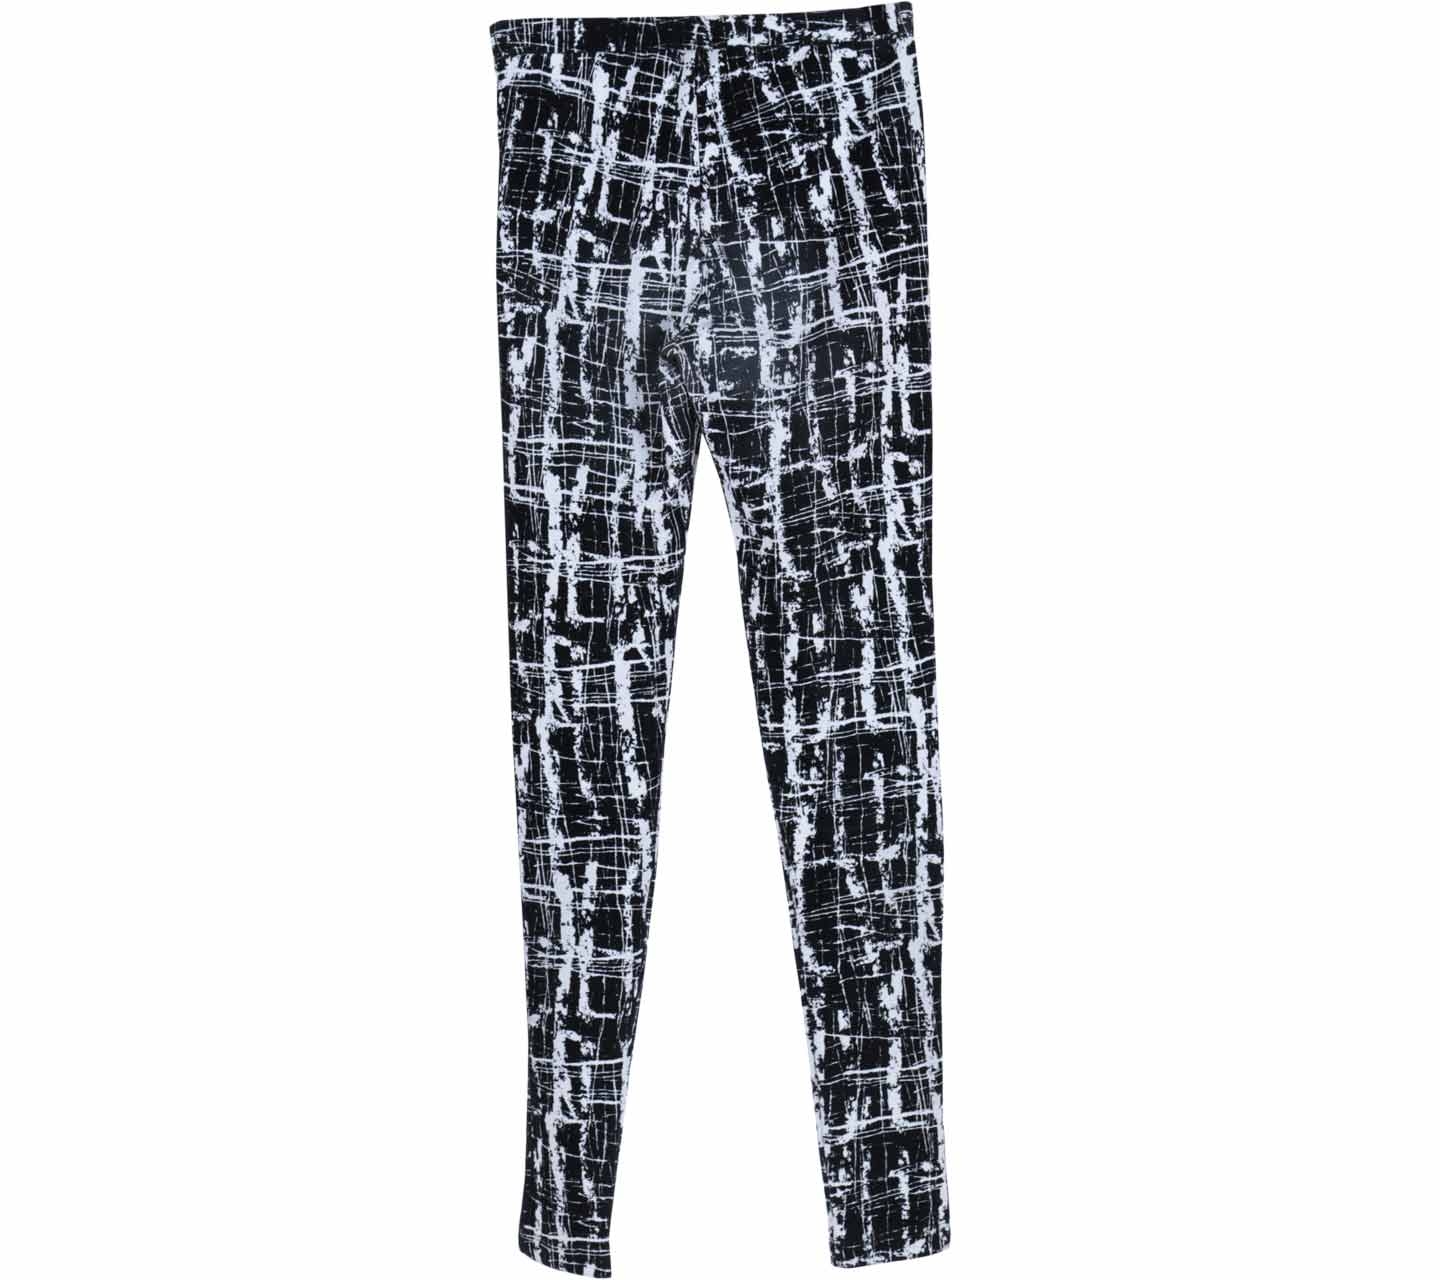 Topshop Black And White Textured Pants